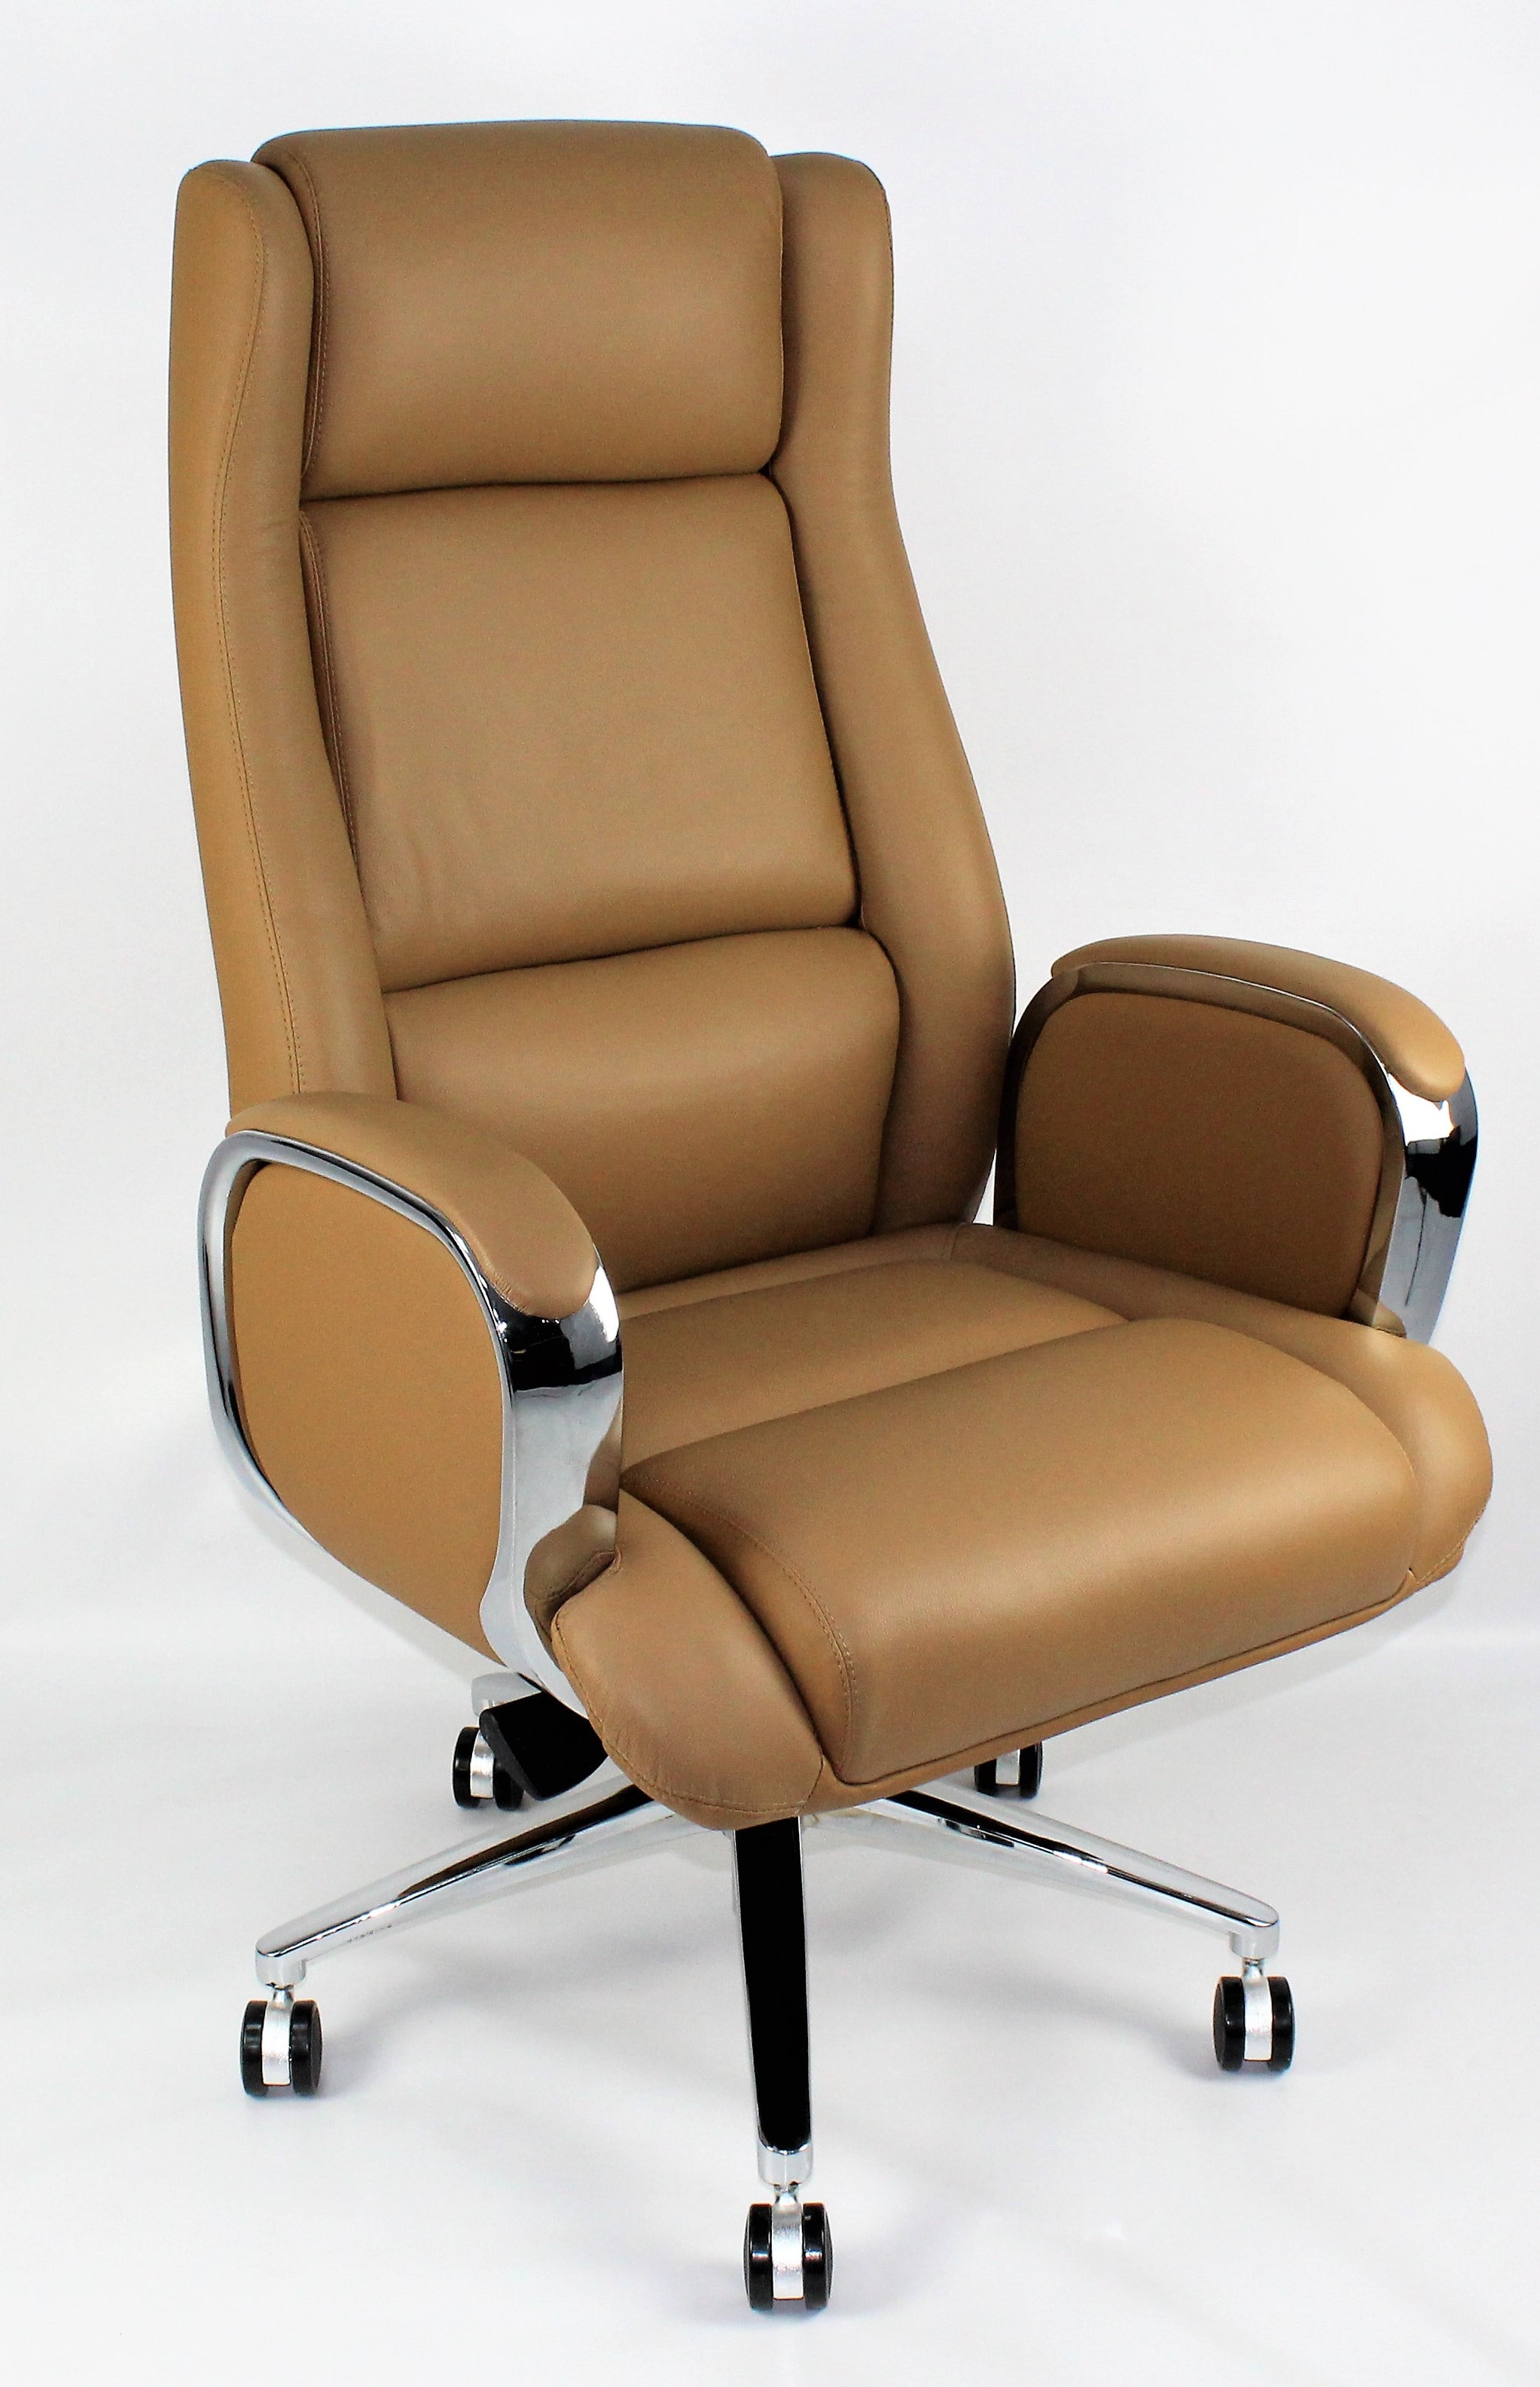 Beige Leather Executive Office Chair with Chrome Trimmed Arms - J1201 Huddersfield